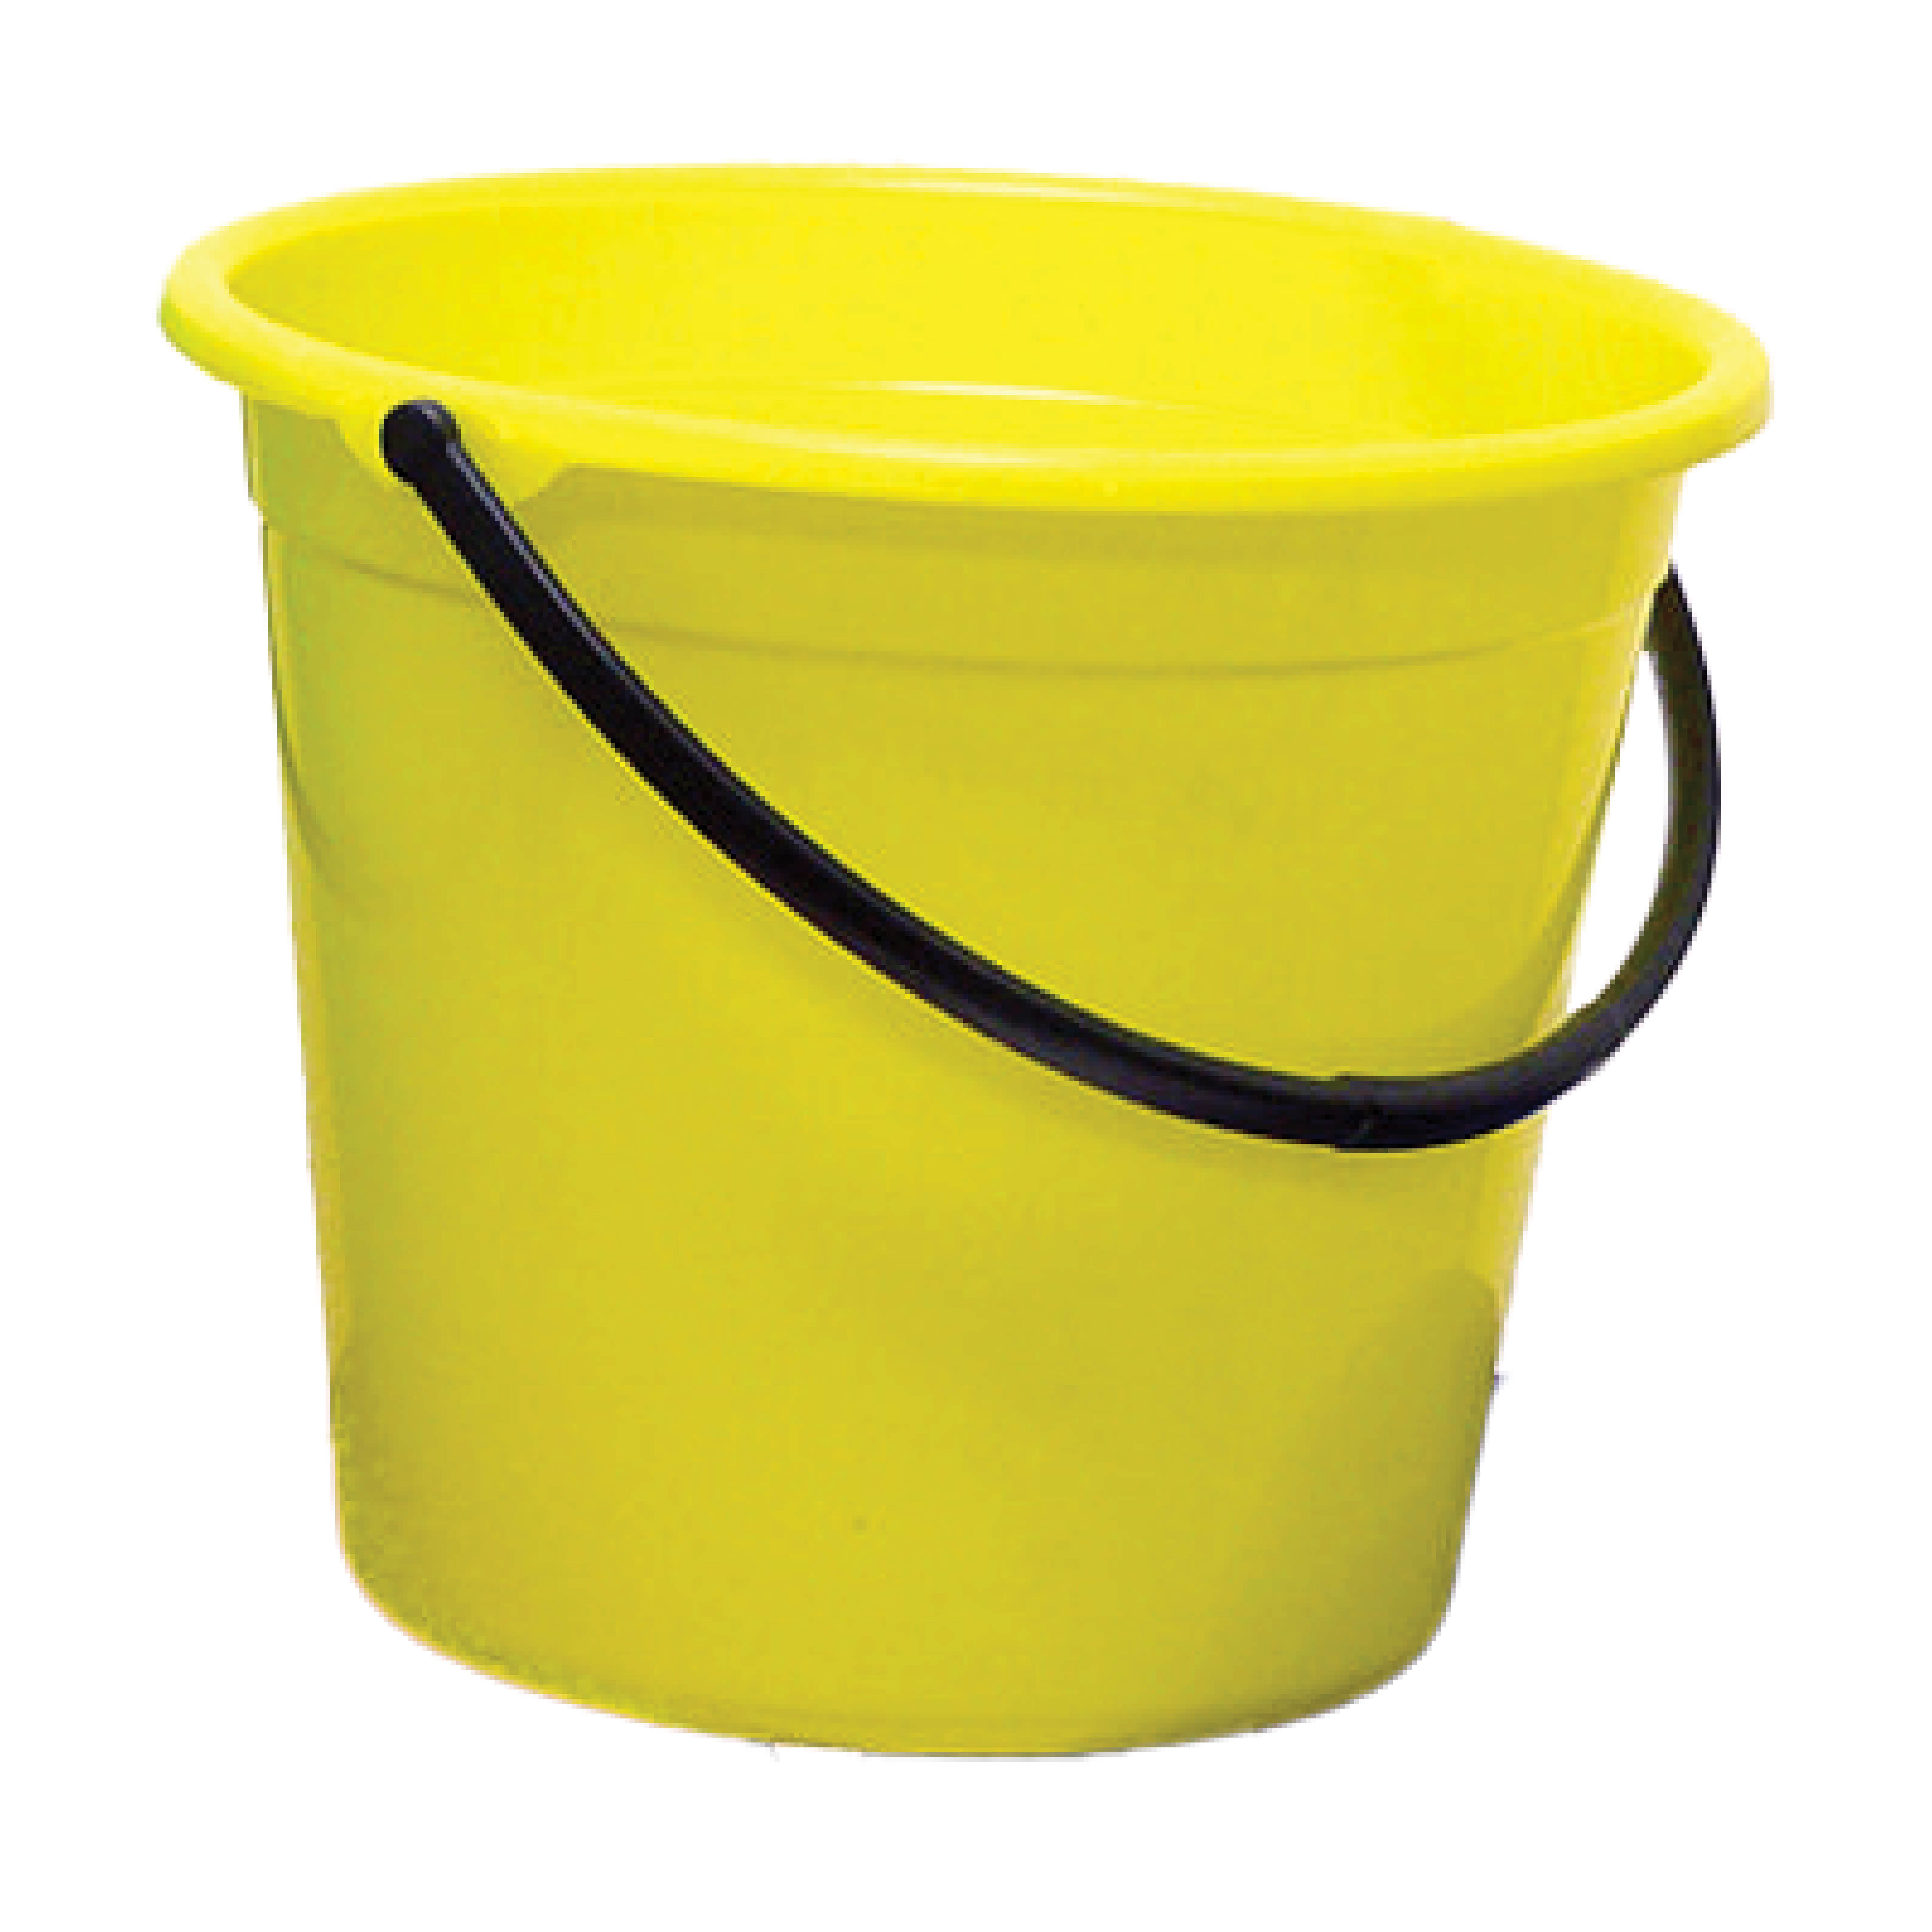 Plastic Bucket with Handle 10ltr - Yellow (each)